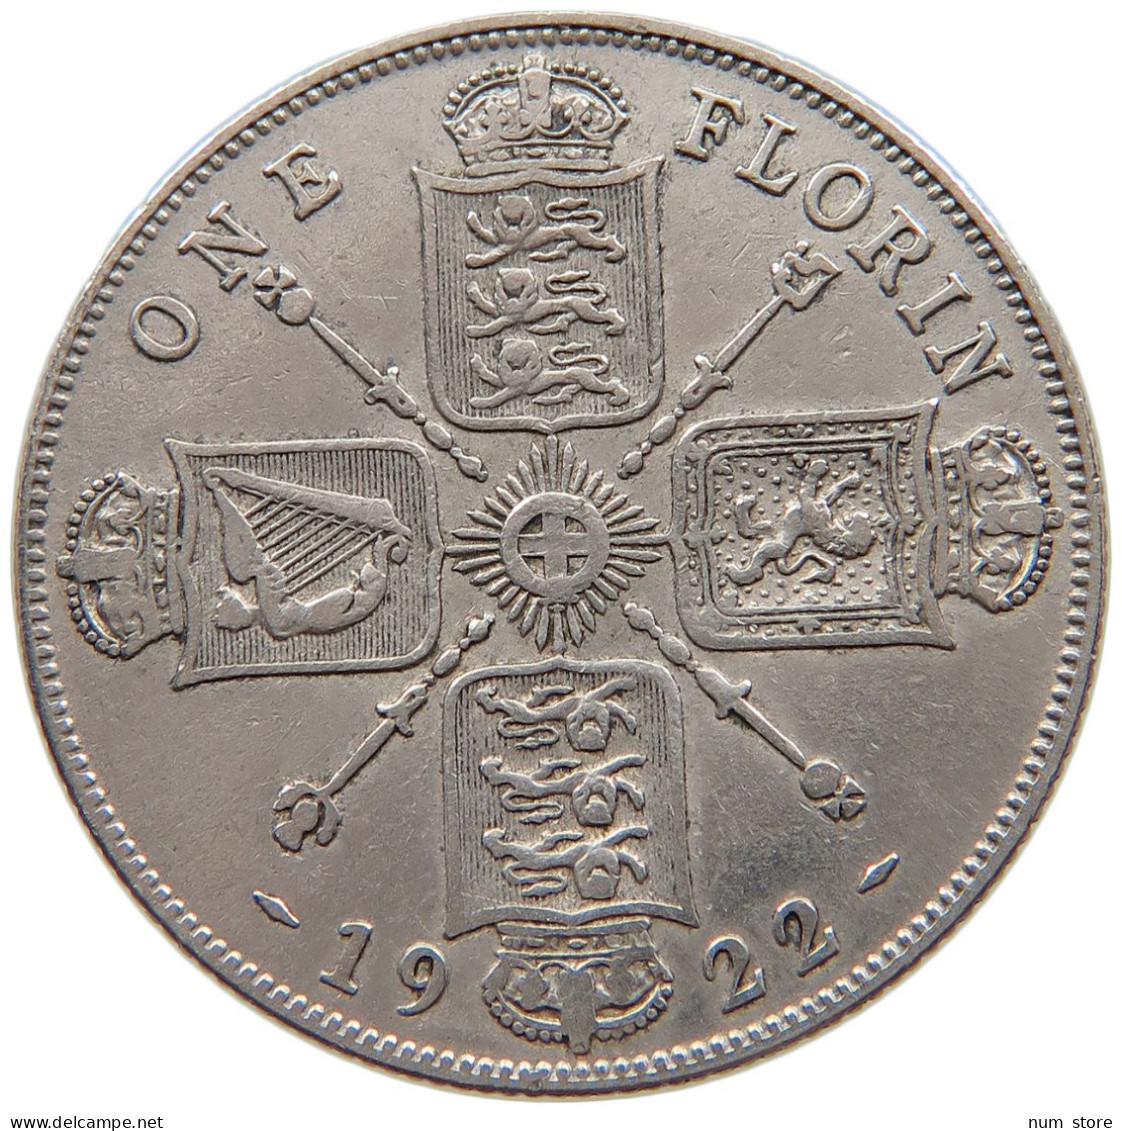 GREAT BRITAIN FLORIN 1922 George V. (1910-1936) #a052 0135 - J. 1 Florin / 2 Shillings